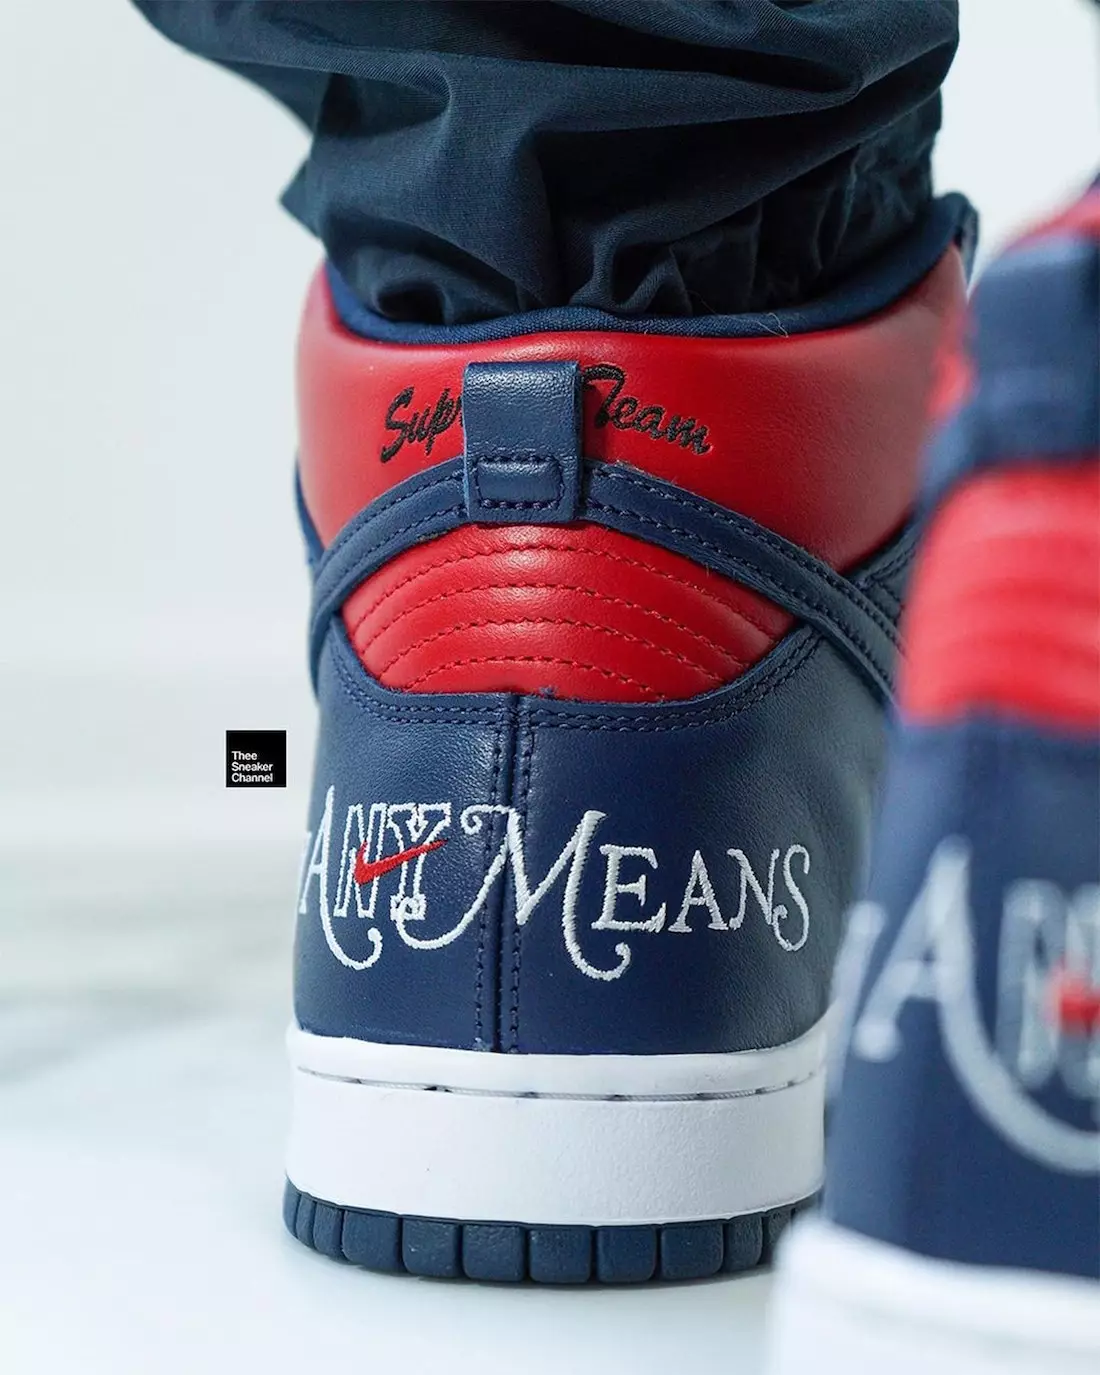 Super Nike SB Dunk High By Any Red Navy On-Feet